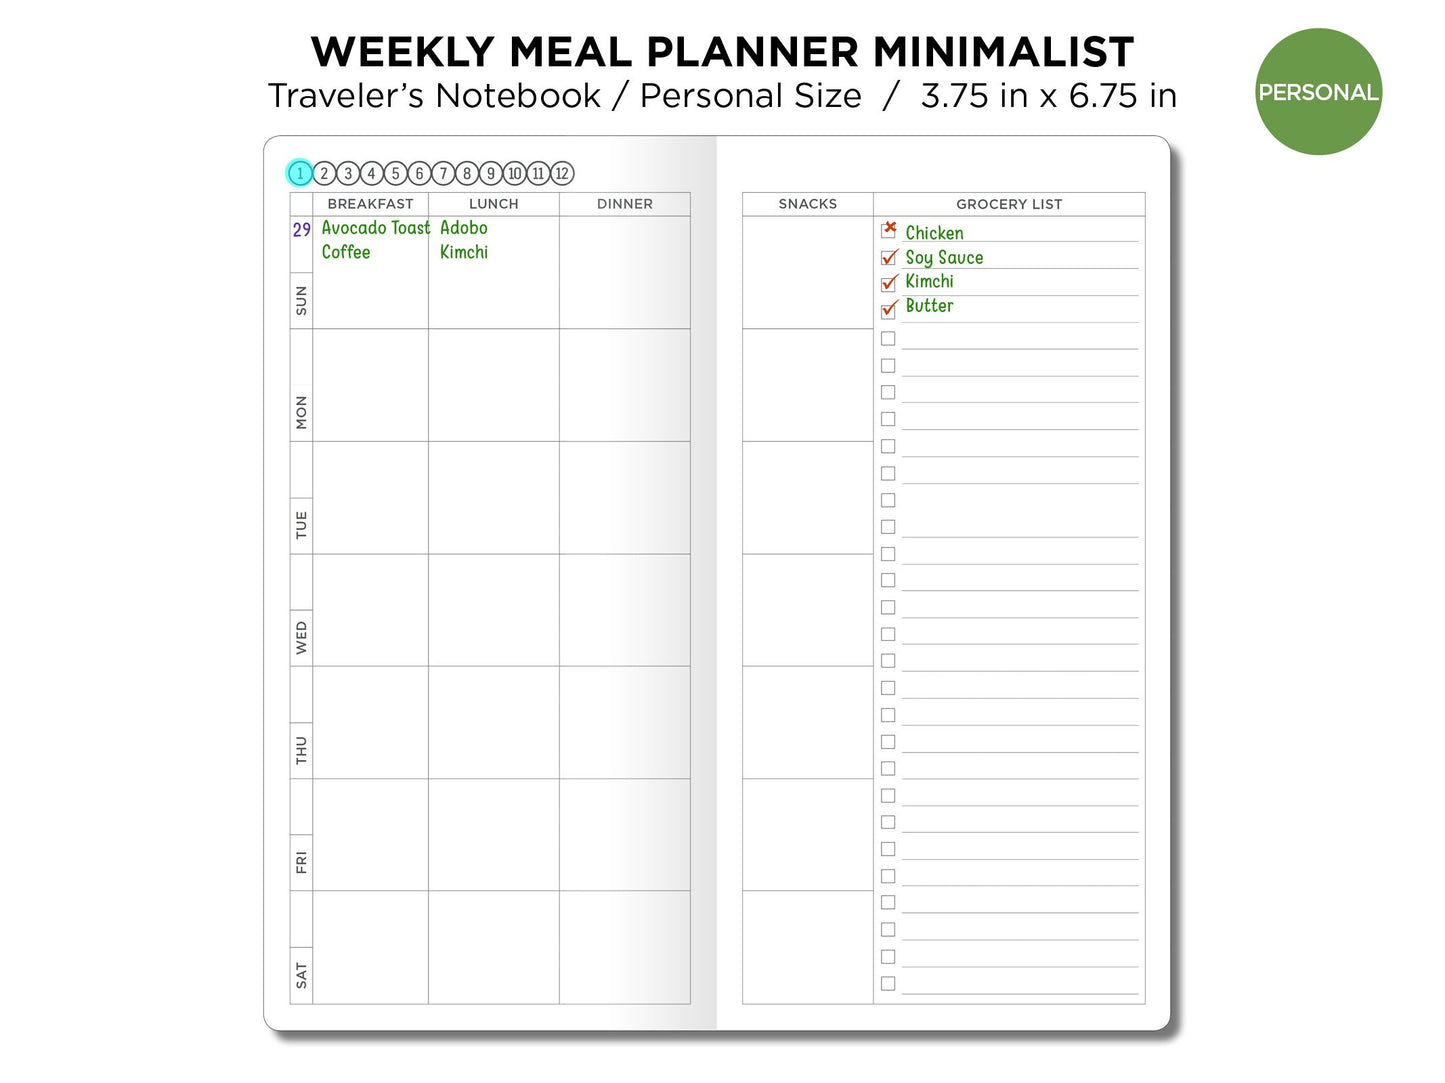 TN PERSONAL WEEKLY Meal Planner Traveler's Notebook - Printable Refill Insert